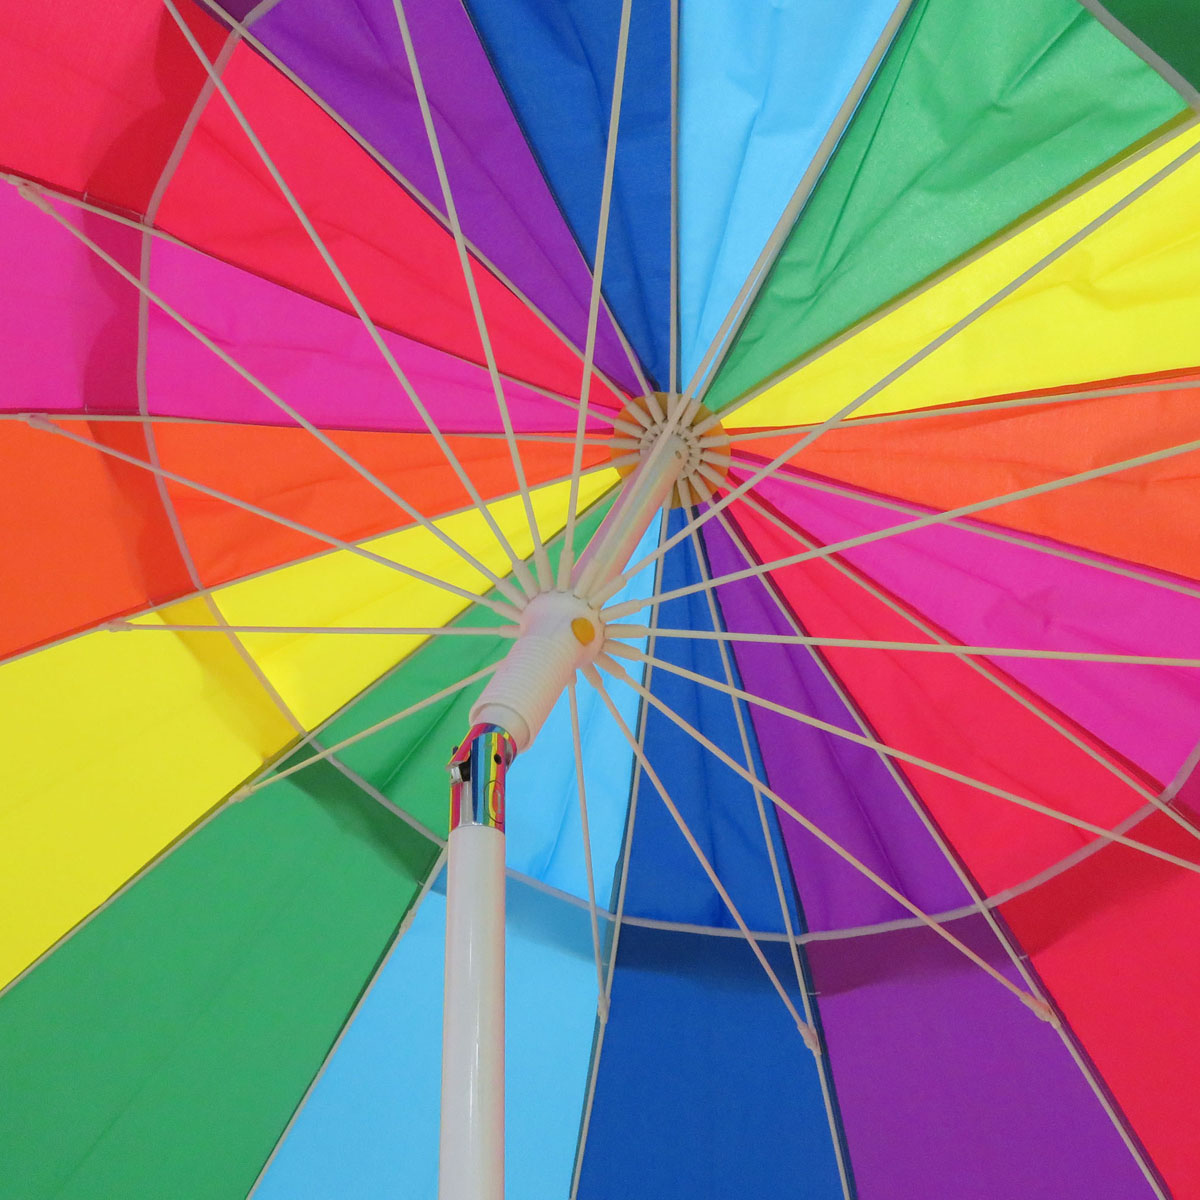 Mainstays 8 ft. Vented Tilt Rainbow Beach Umbrella with UV Protection - image 2 of 5